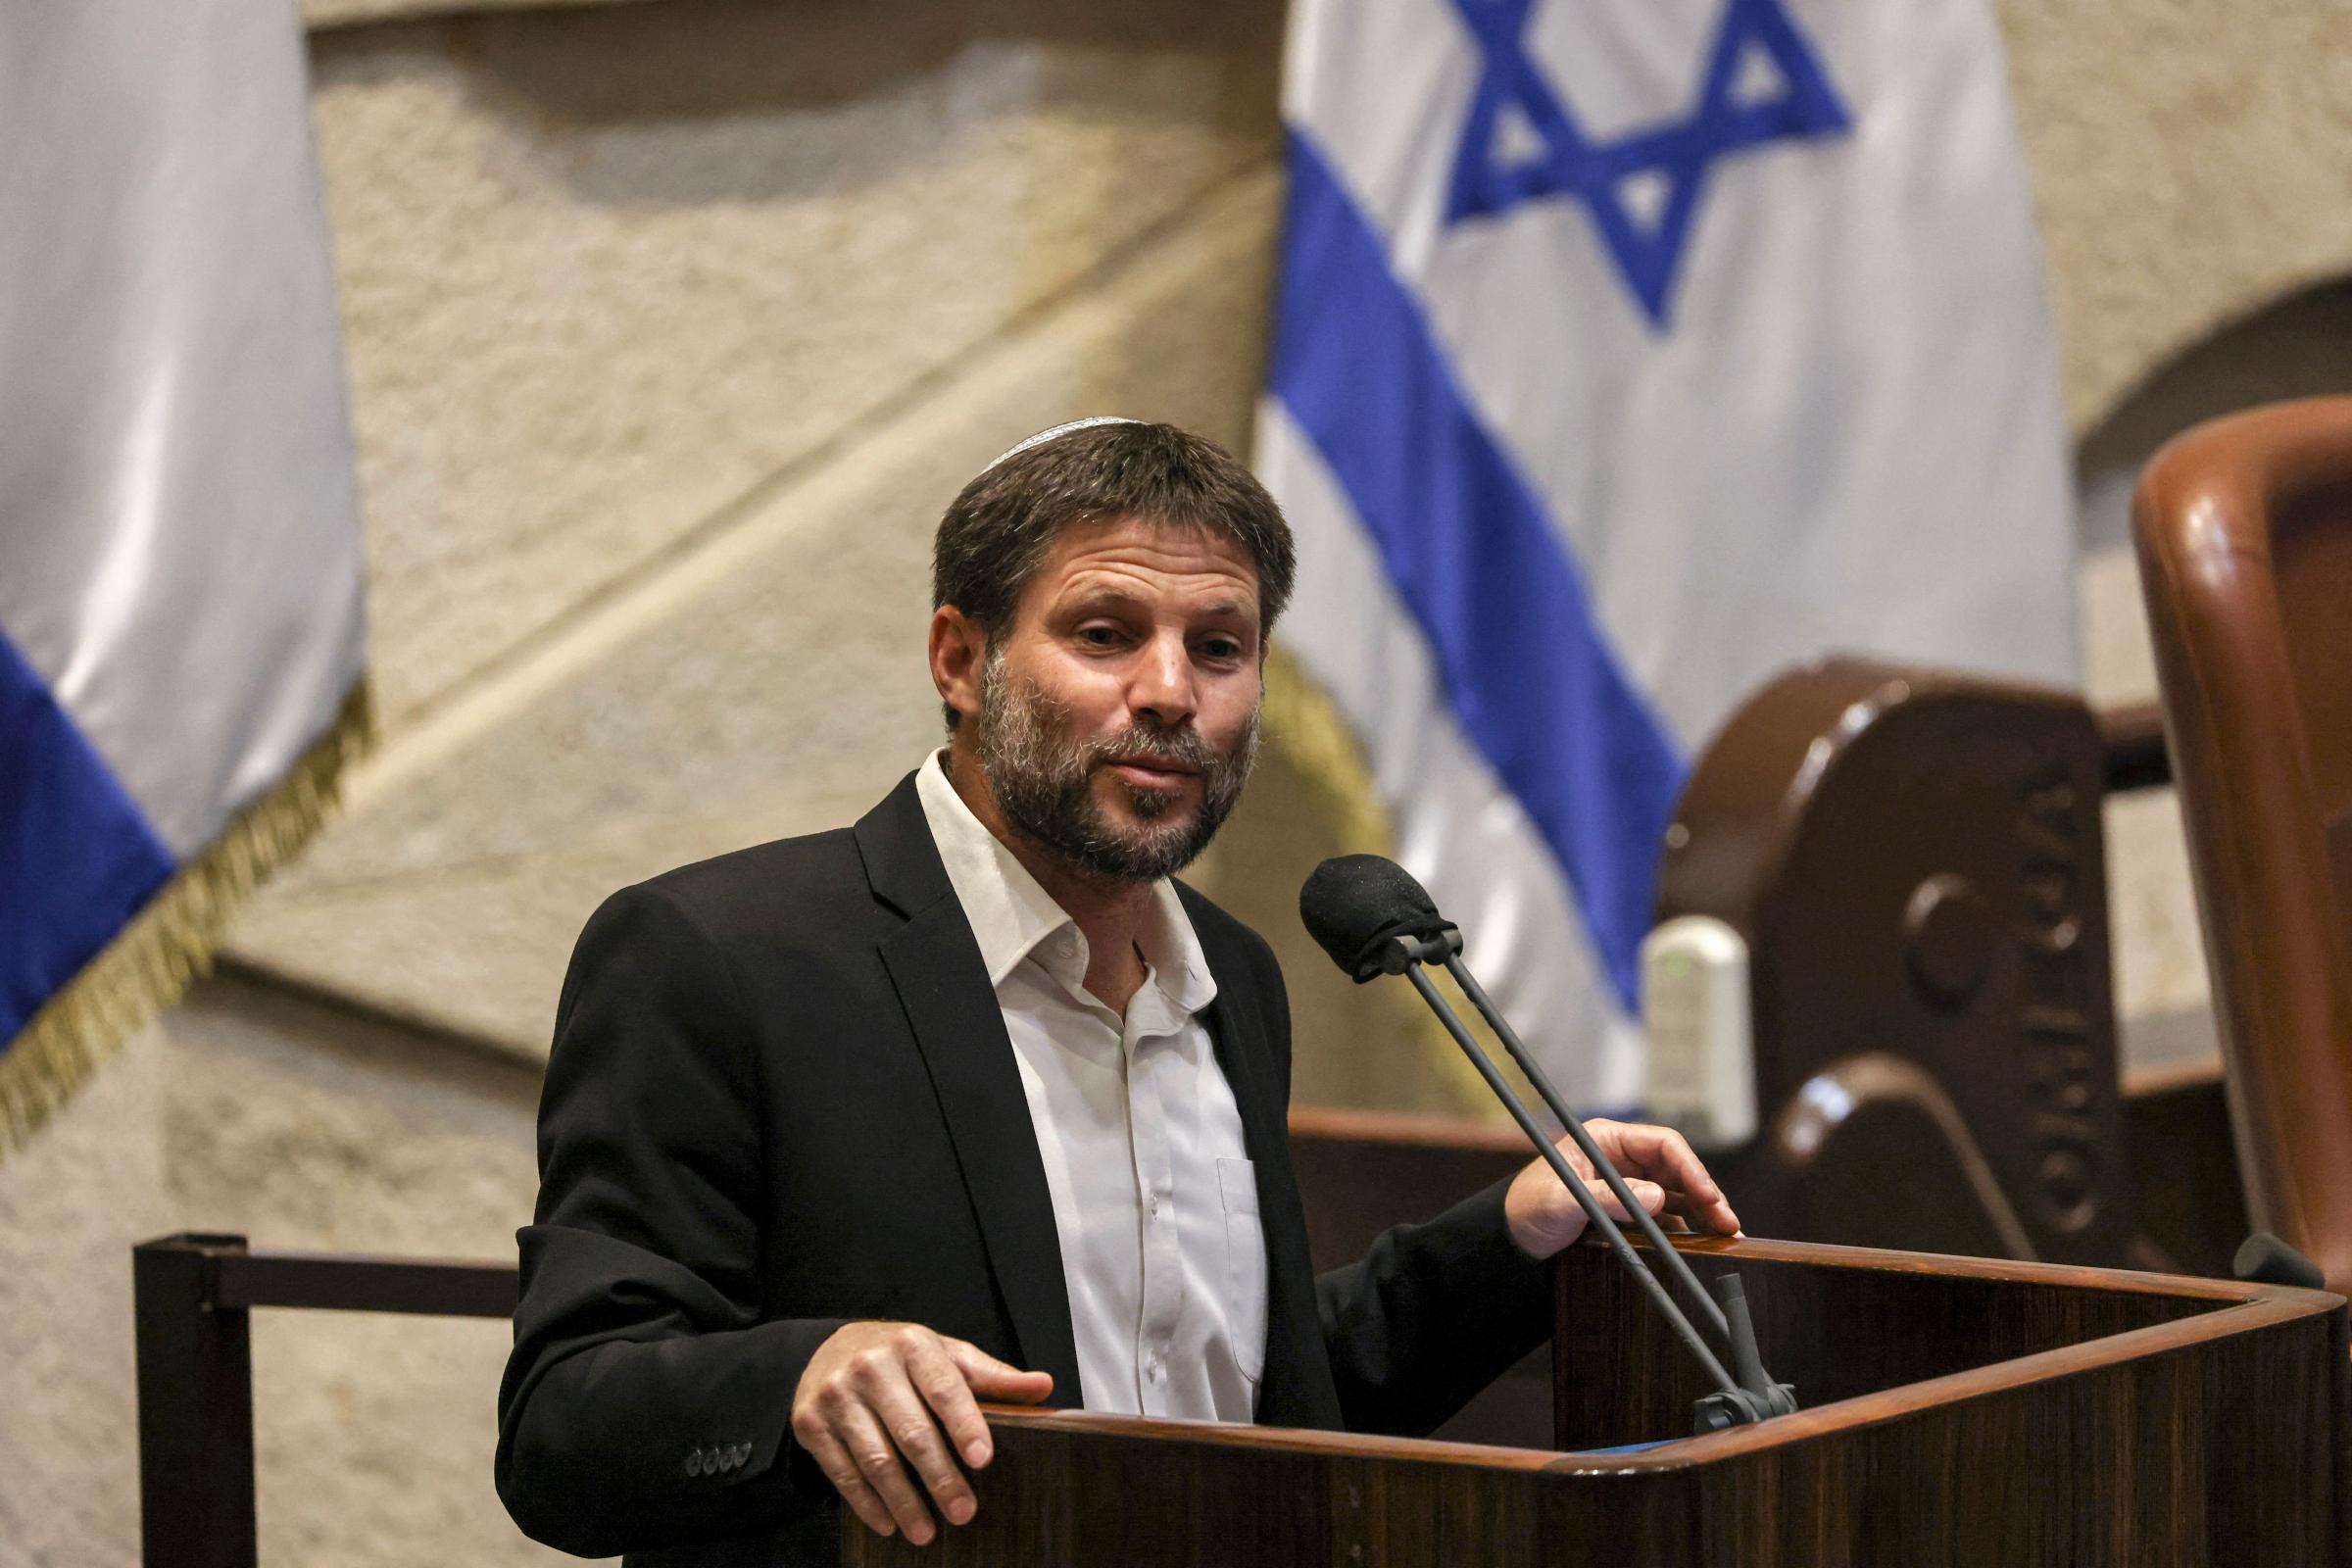 Bezalel Smotrich, leader of the Religious Zionist Party (Tkuma), speaks during a plenum session on the state budget on September 2, 2021. (Photo by AHMAD GHARABLI / AFP) (Photo by AHMAD GHARABLI/AFP via Getty Images).